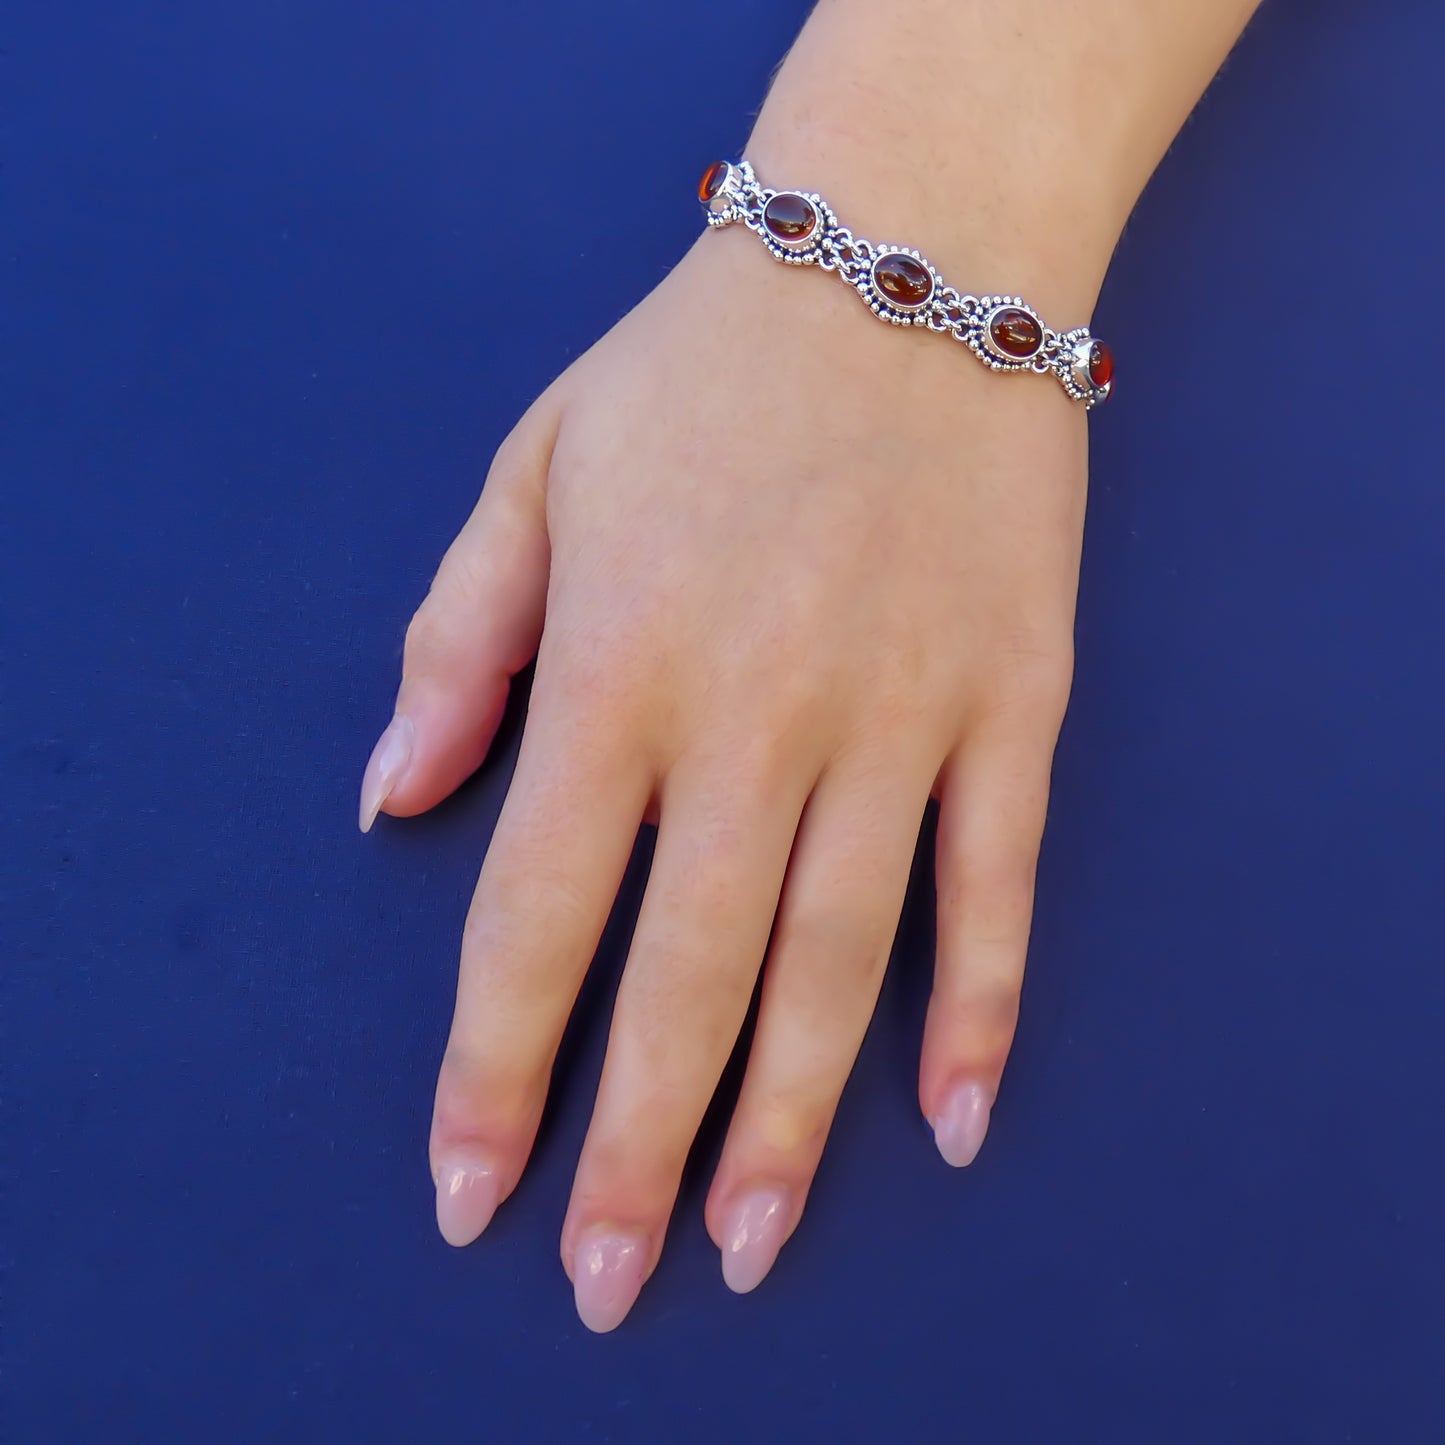 Woman wearing a silver amber link bracelet with beaded accents.